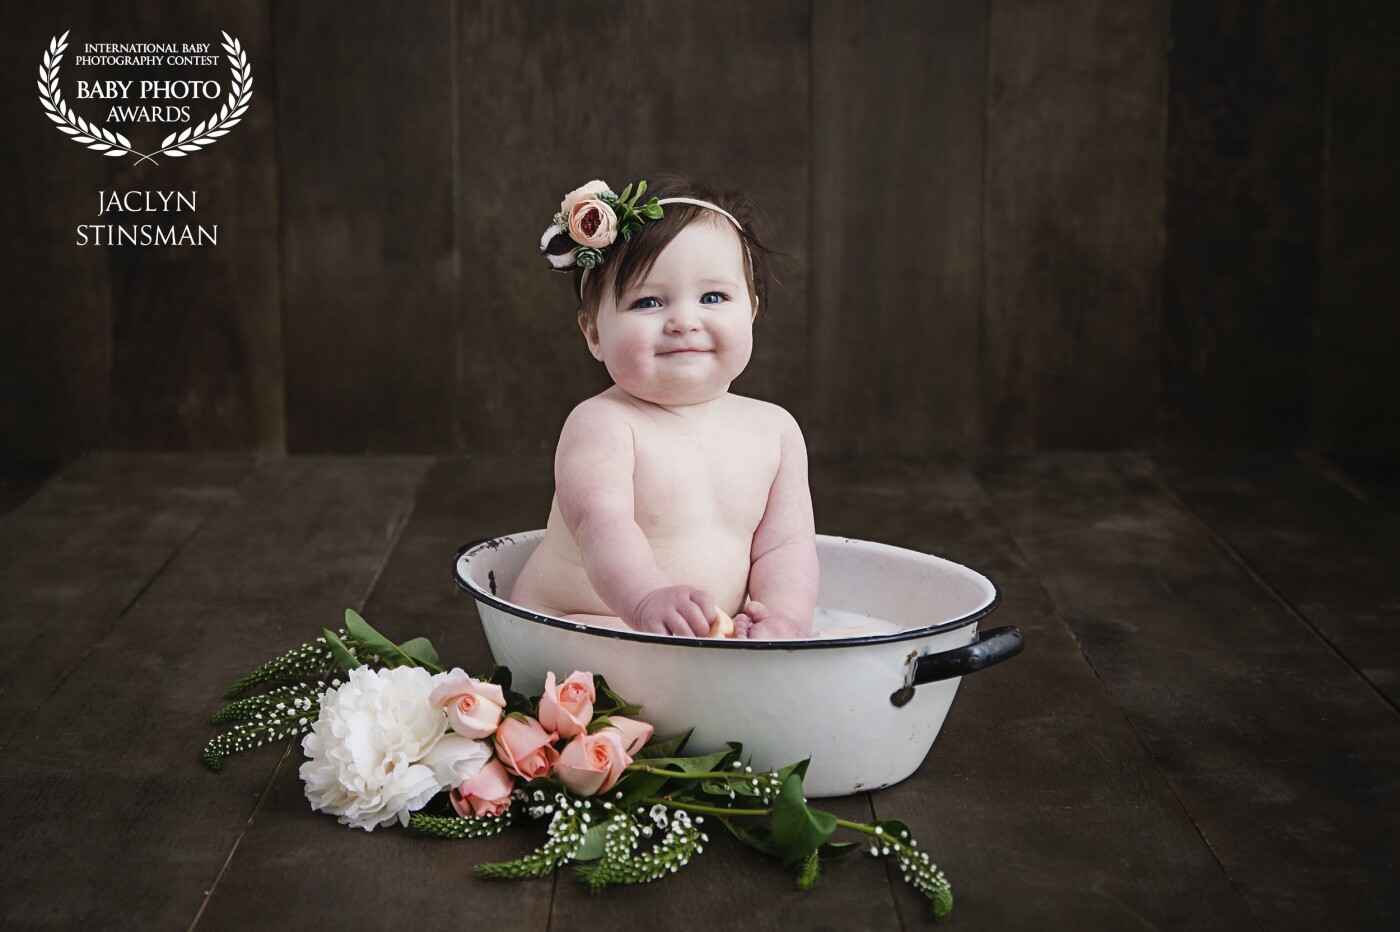 Scarlett at 8 months for her milk bath session. We have been photographing Scarlett since she was in the womb. We also customize every session for our clients to make it perfect. Scarlett's mom loves the woodsy flower theme and of course, needed to see her splash in the tub!